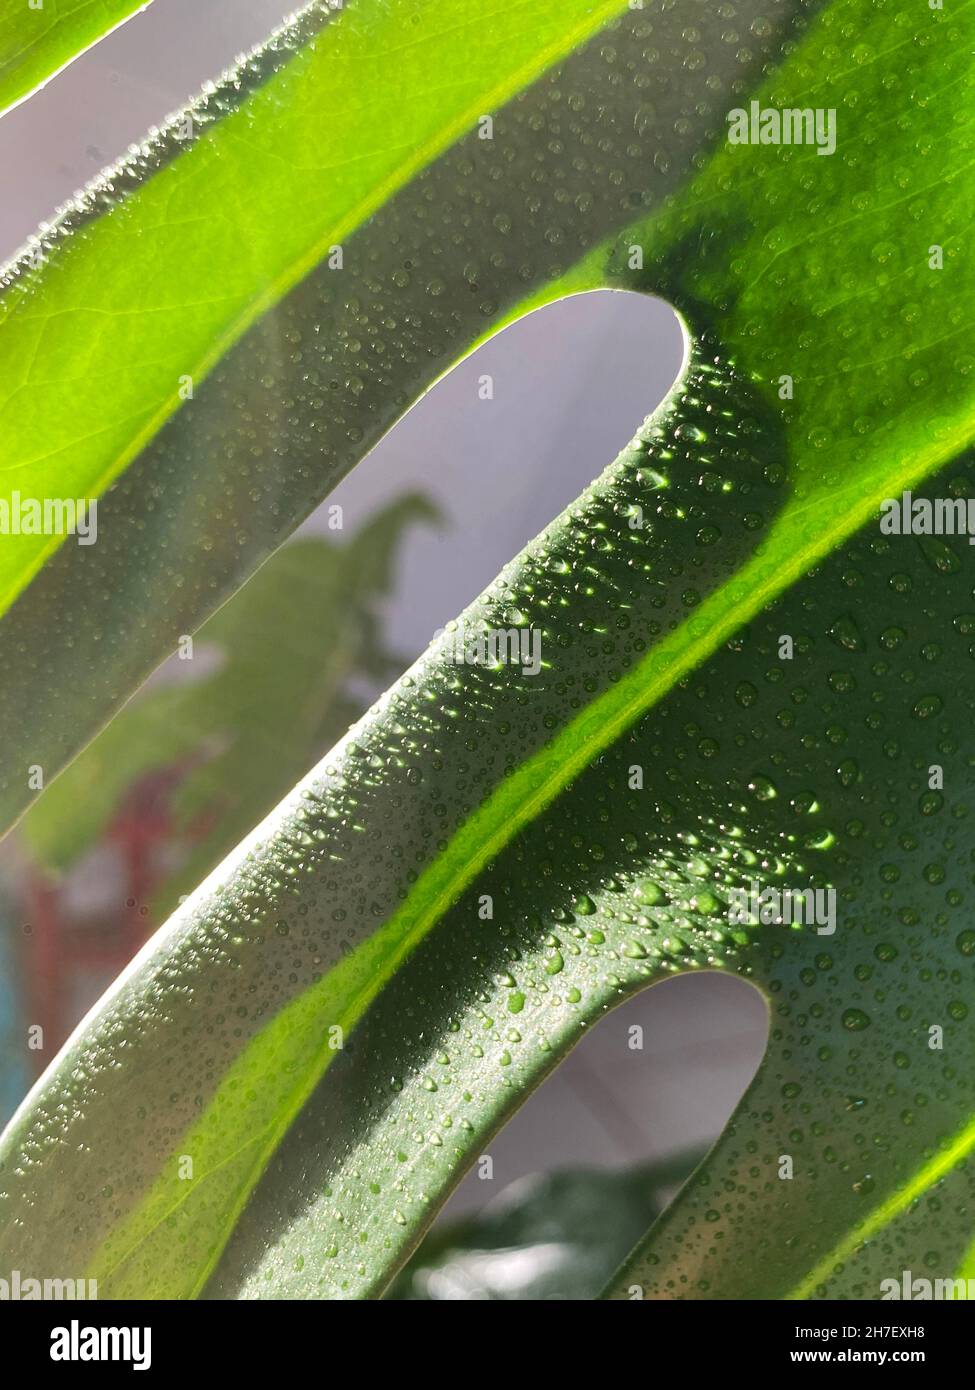 Photos for green backgrounds. Natural leaves from Mostera Delicios, in natural light and close up. Stock Photo